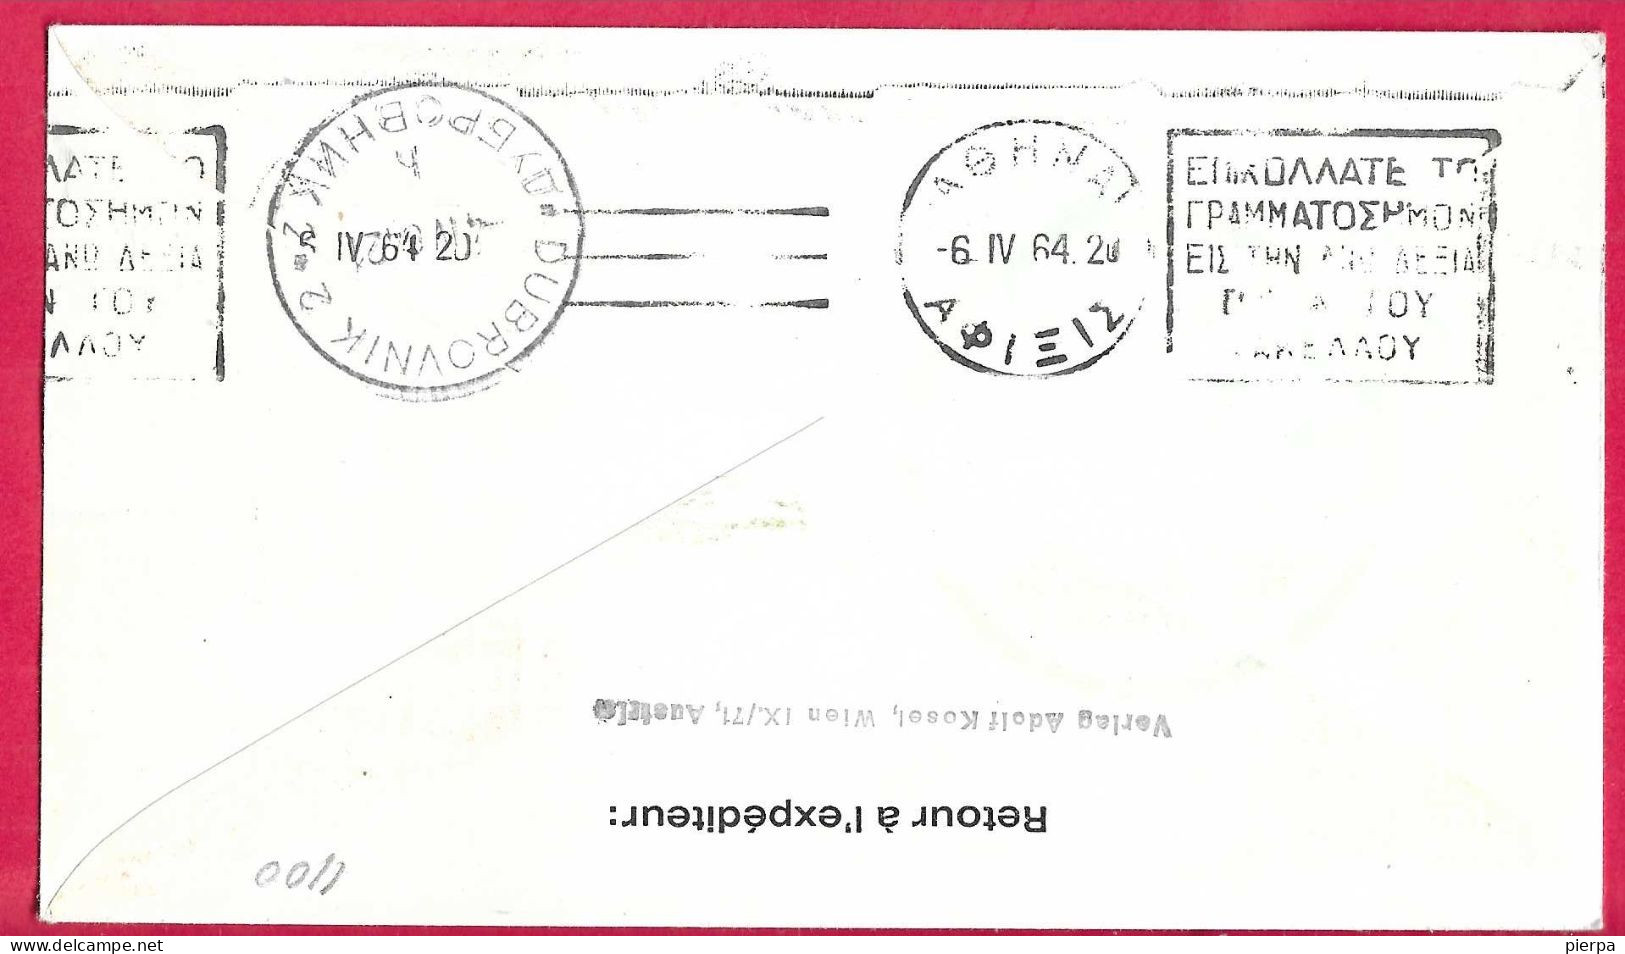 AUSTRIA - FIRST CARAVELLE FLIGHT AUA FROM WIEN/DUBROVNIK TO ATHENS *4.4.1964* ON OFFICIAL COVER - Primeros Vuelos